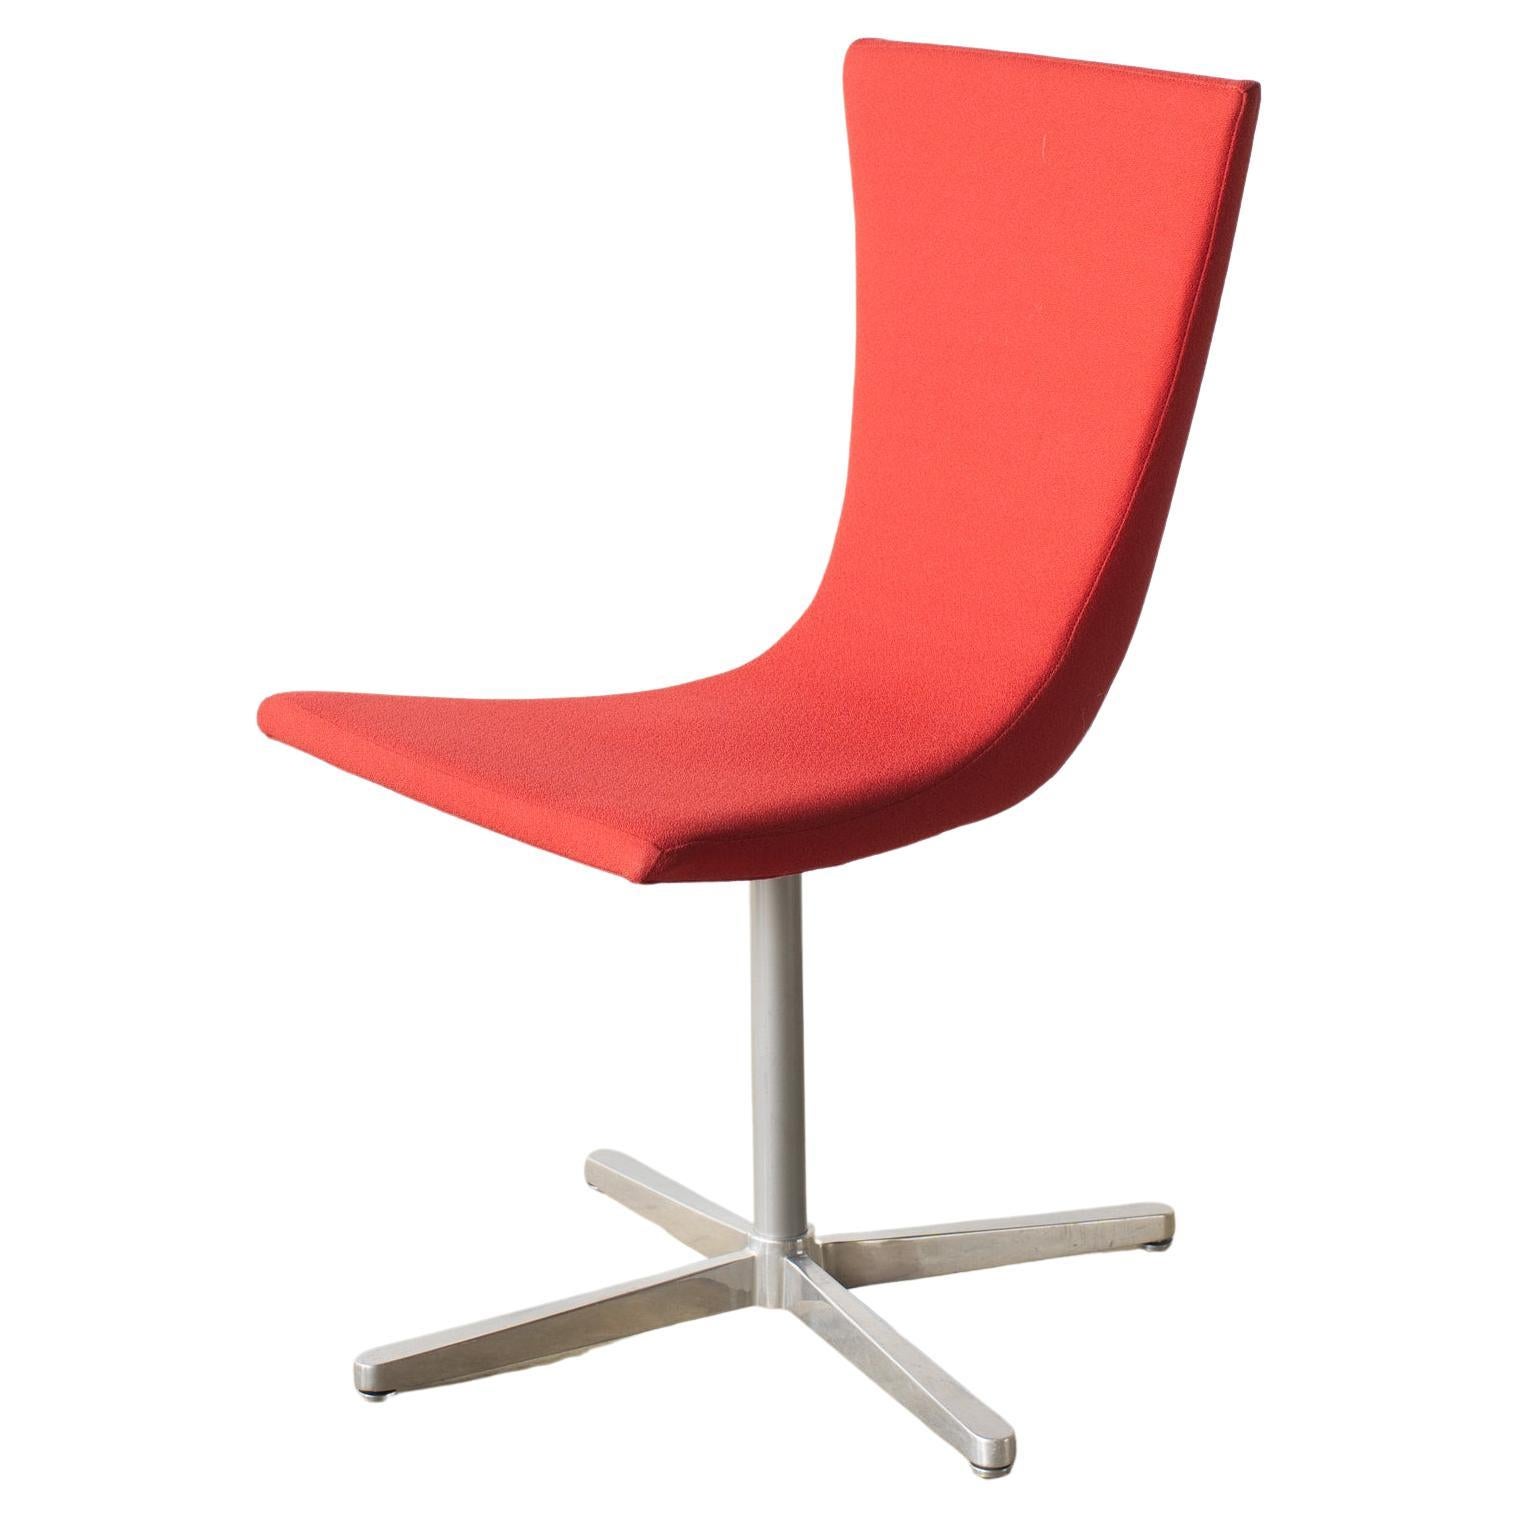 Chair red fabric chair Christian Ghion  Y2K style design space age For Sale